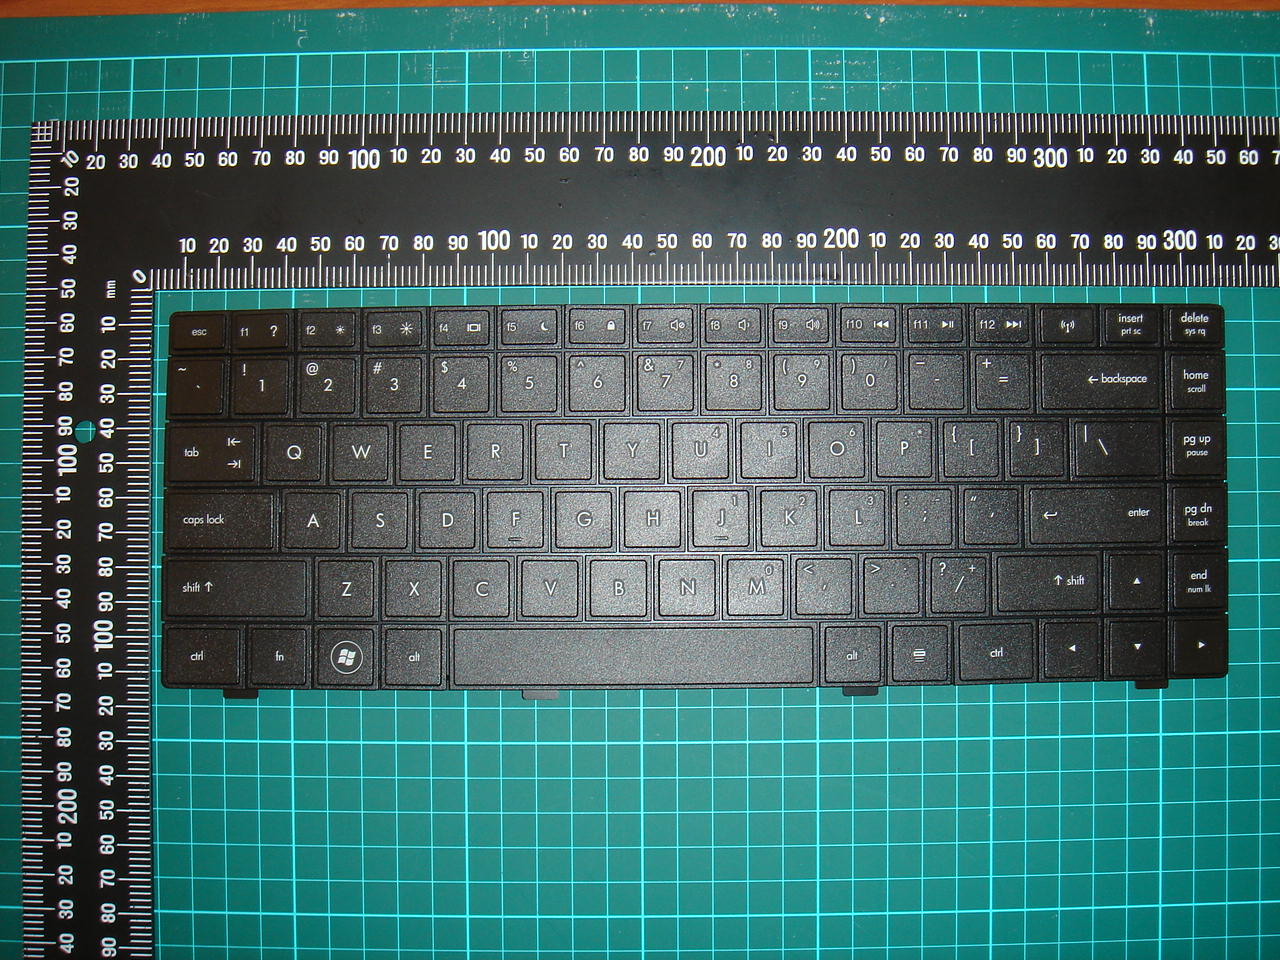 Keyboard assembly - For use on models